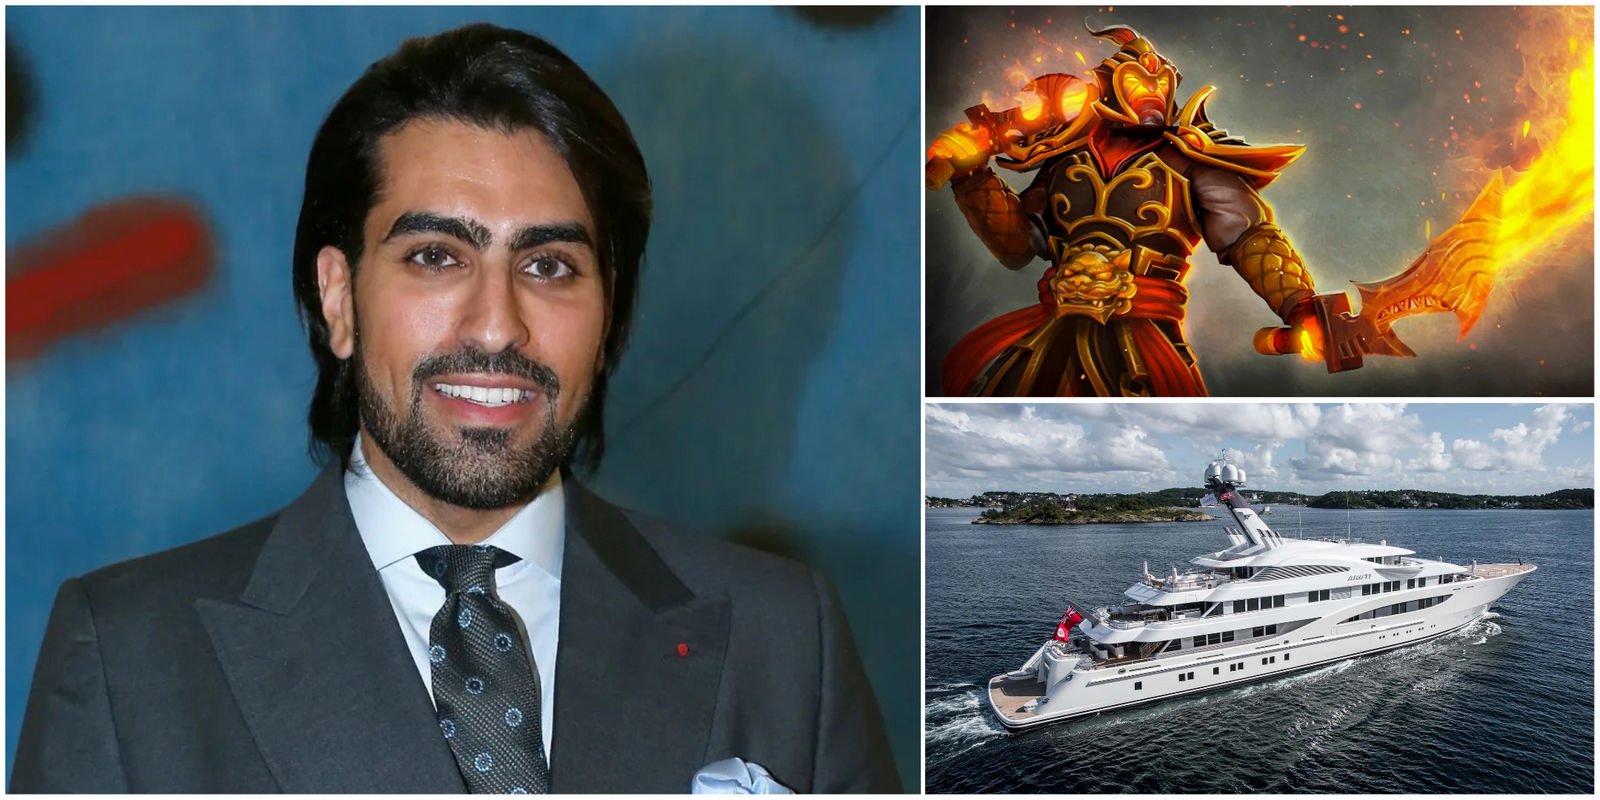 Worth $2.7 billion and owner of 6 luxury yachts, meet this Oxford-educated Saudi Prince who is an avid gamer and has donated tens of thousands of dollars for the development of Dota 2, a popular multiplayer game.